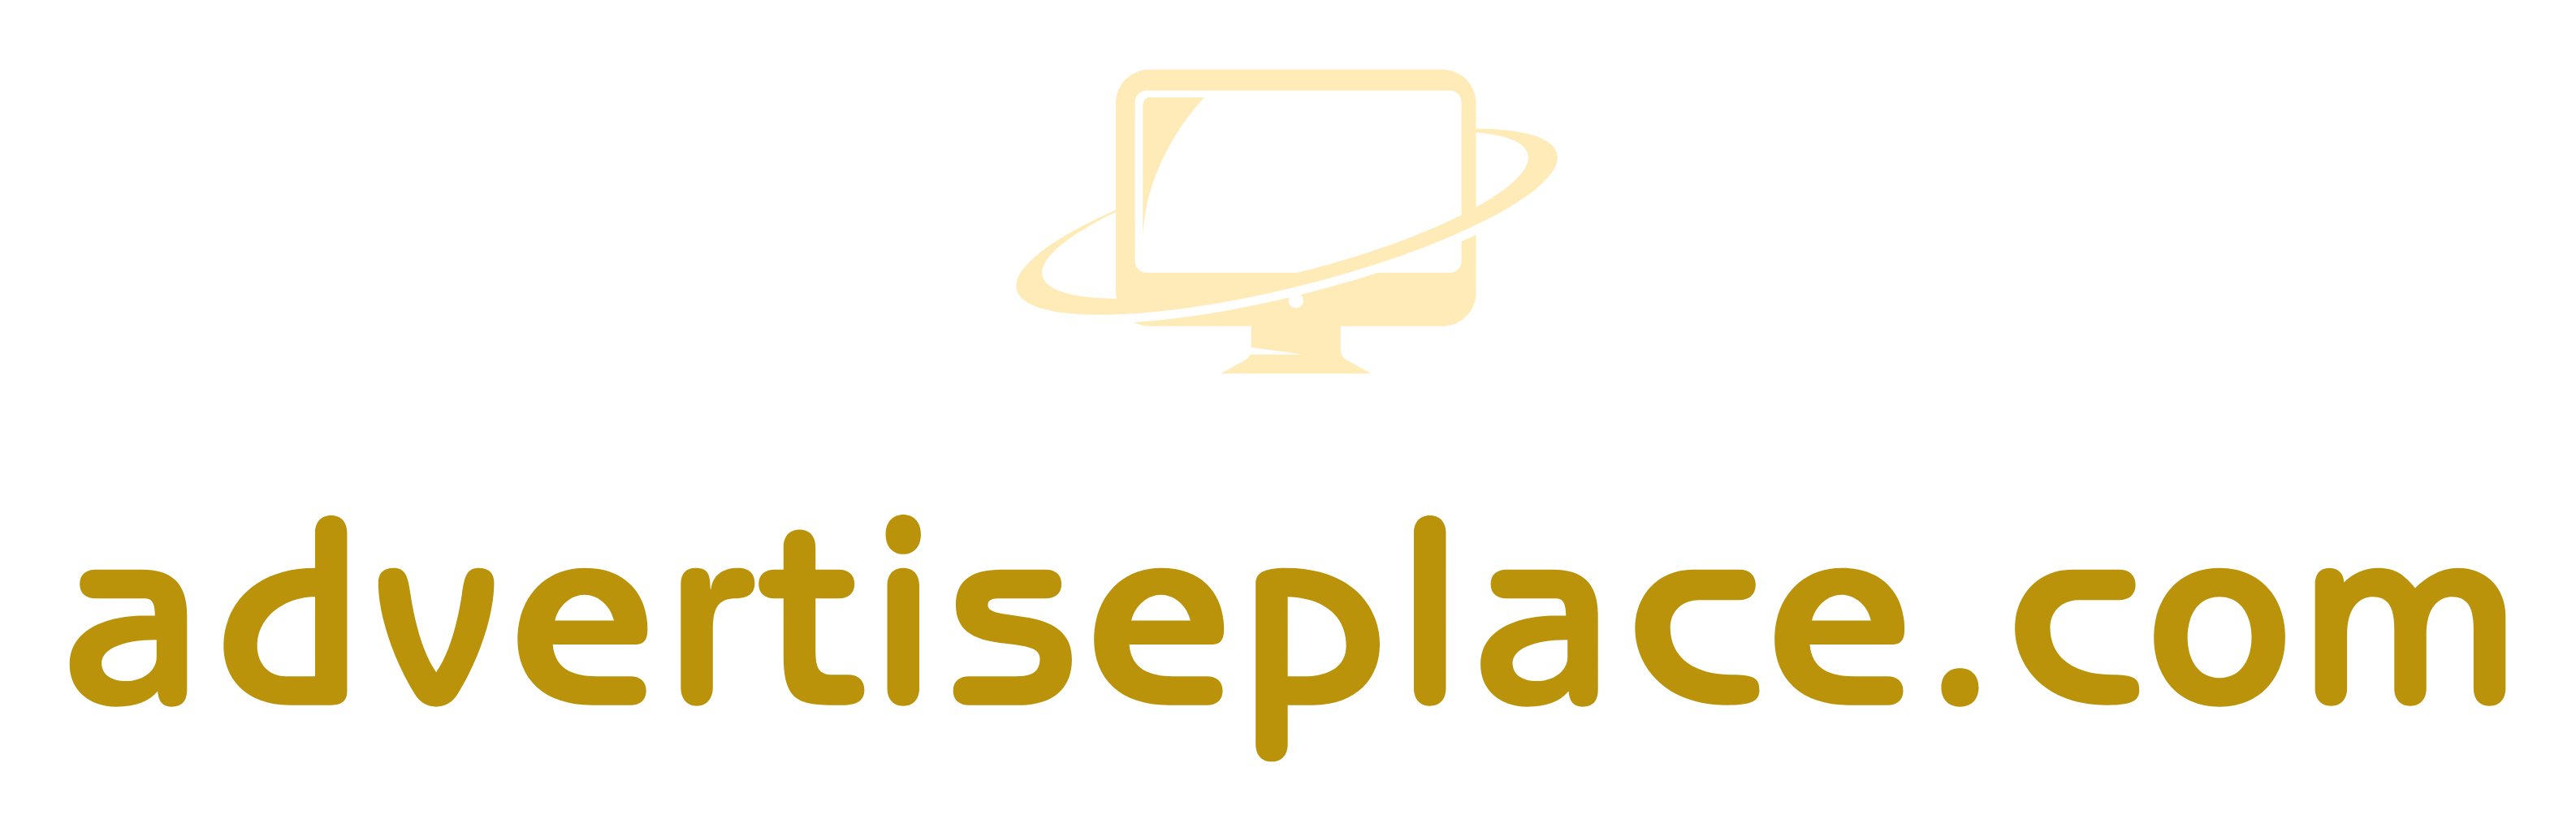 Advertiseplace.com - A user-friendly platform for effortless buying and selling. Boost visibility with our seamless interface, making your listings stand out in a vibrant marketplace.